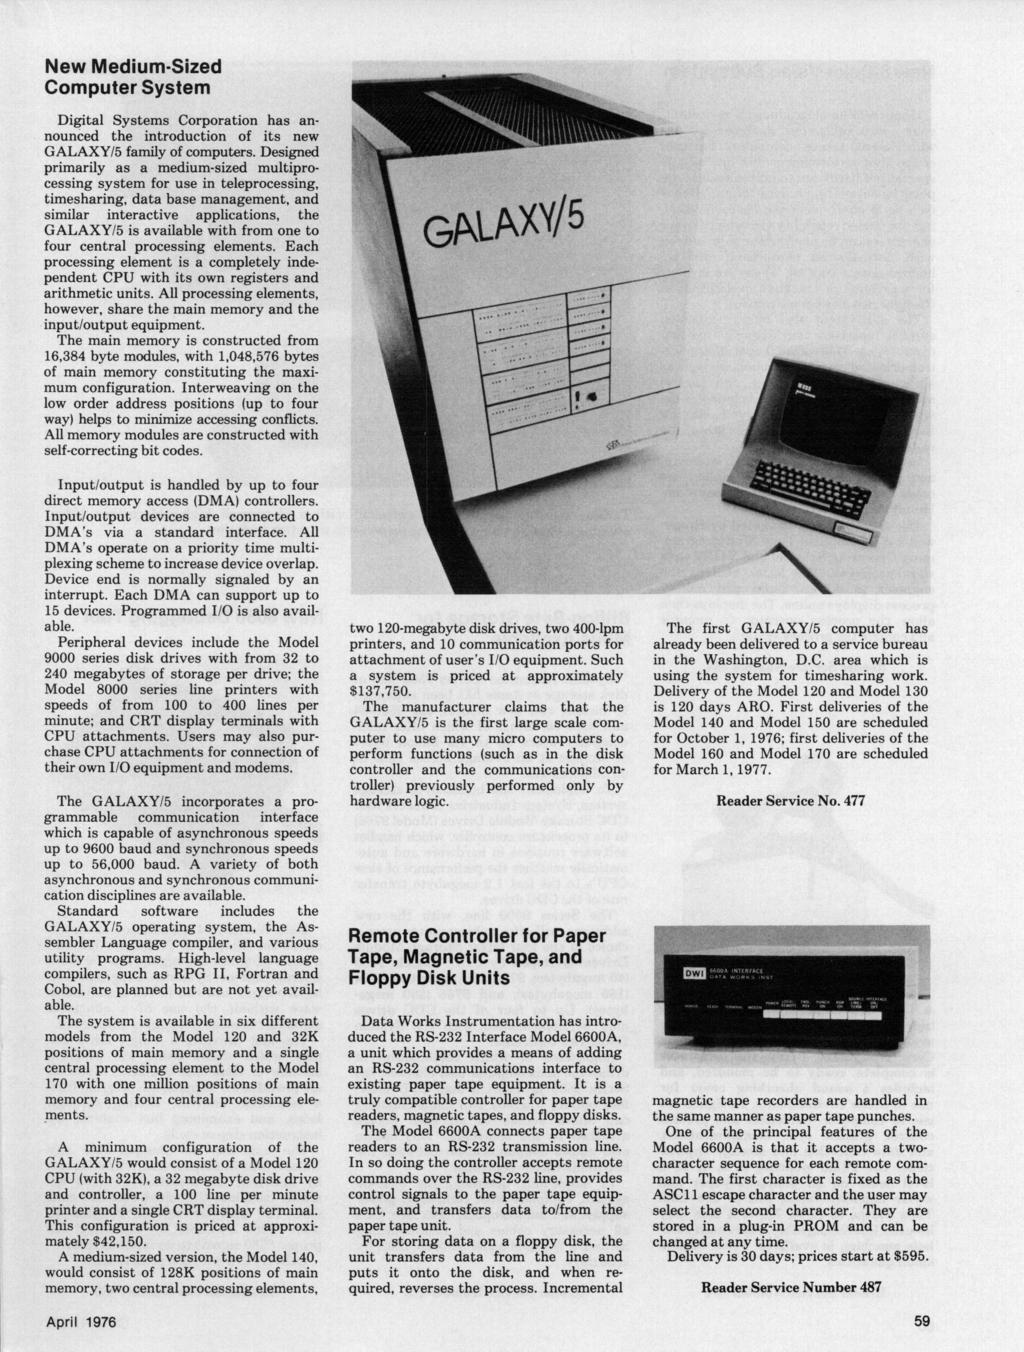 New Medium-Sized Computer System Digital Systems Corporation has announced the introduction of its new GALAXY/5 family of computers.